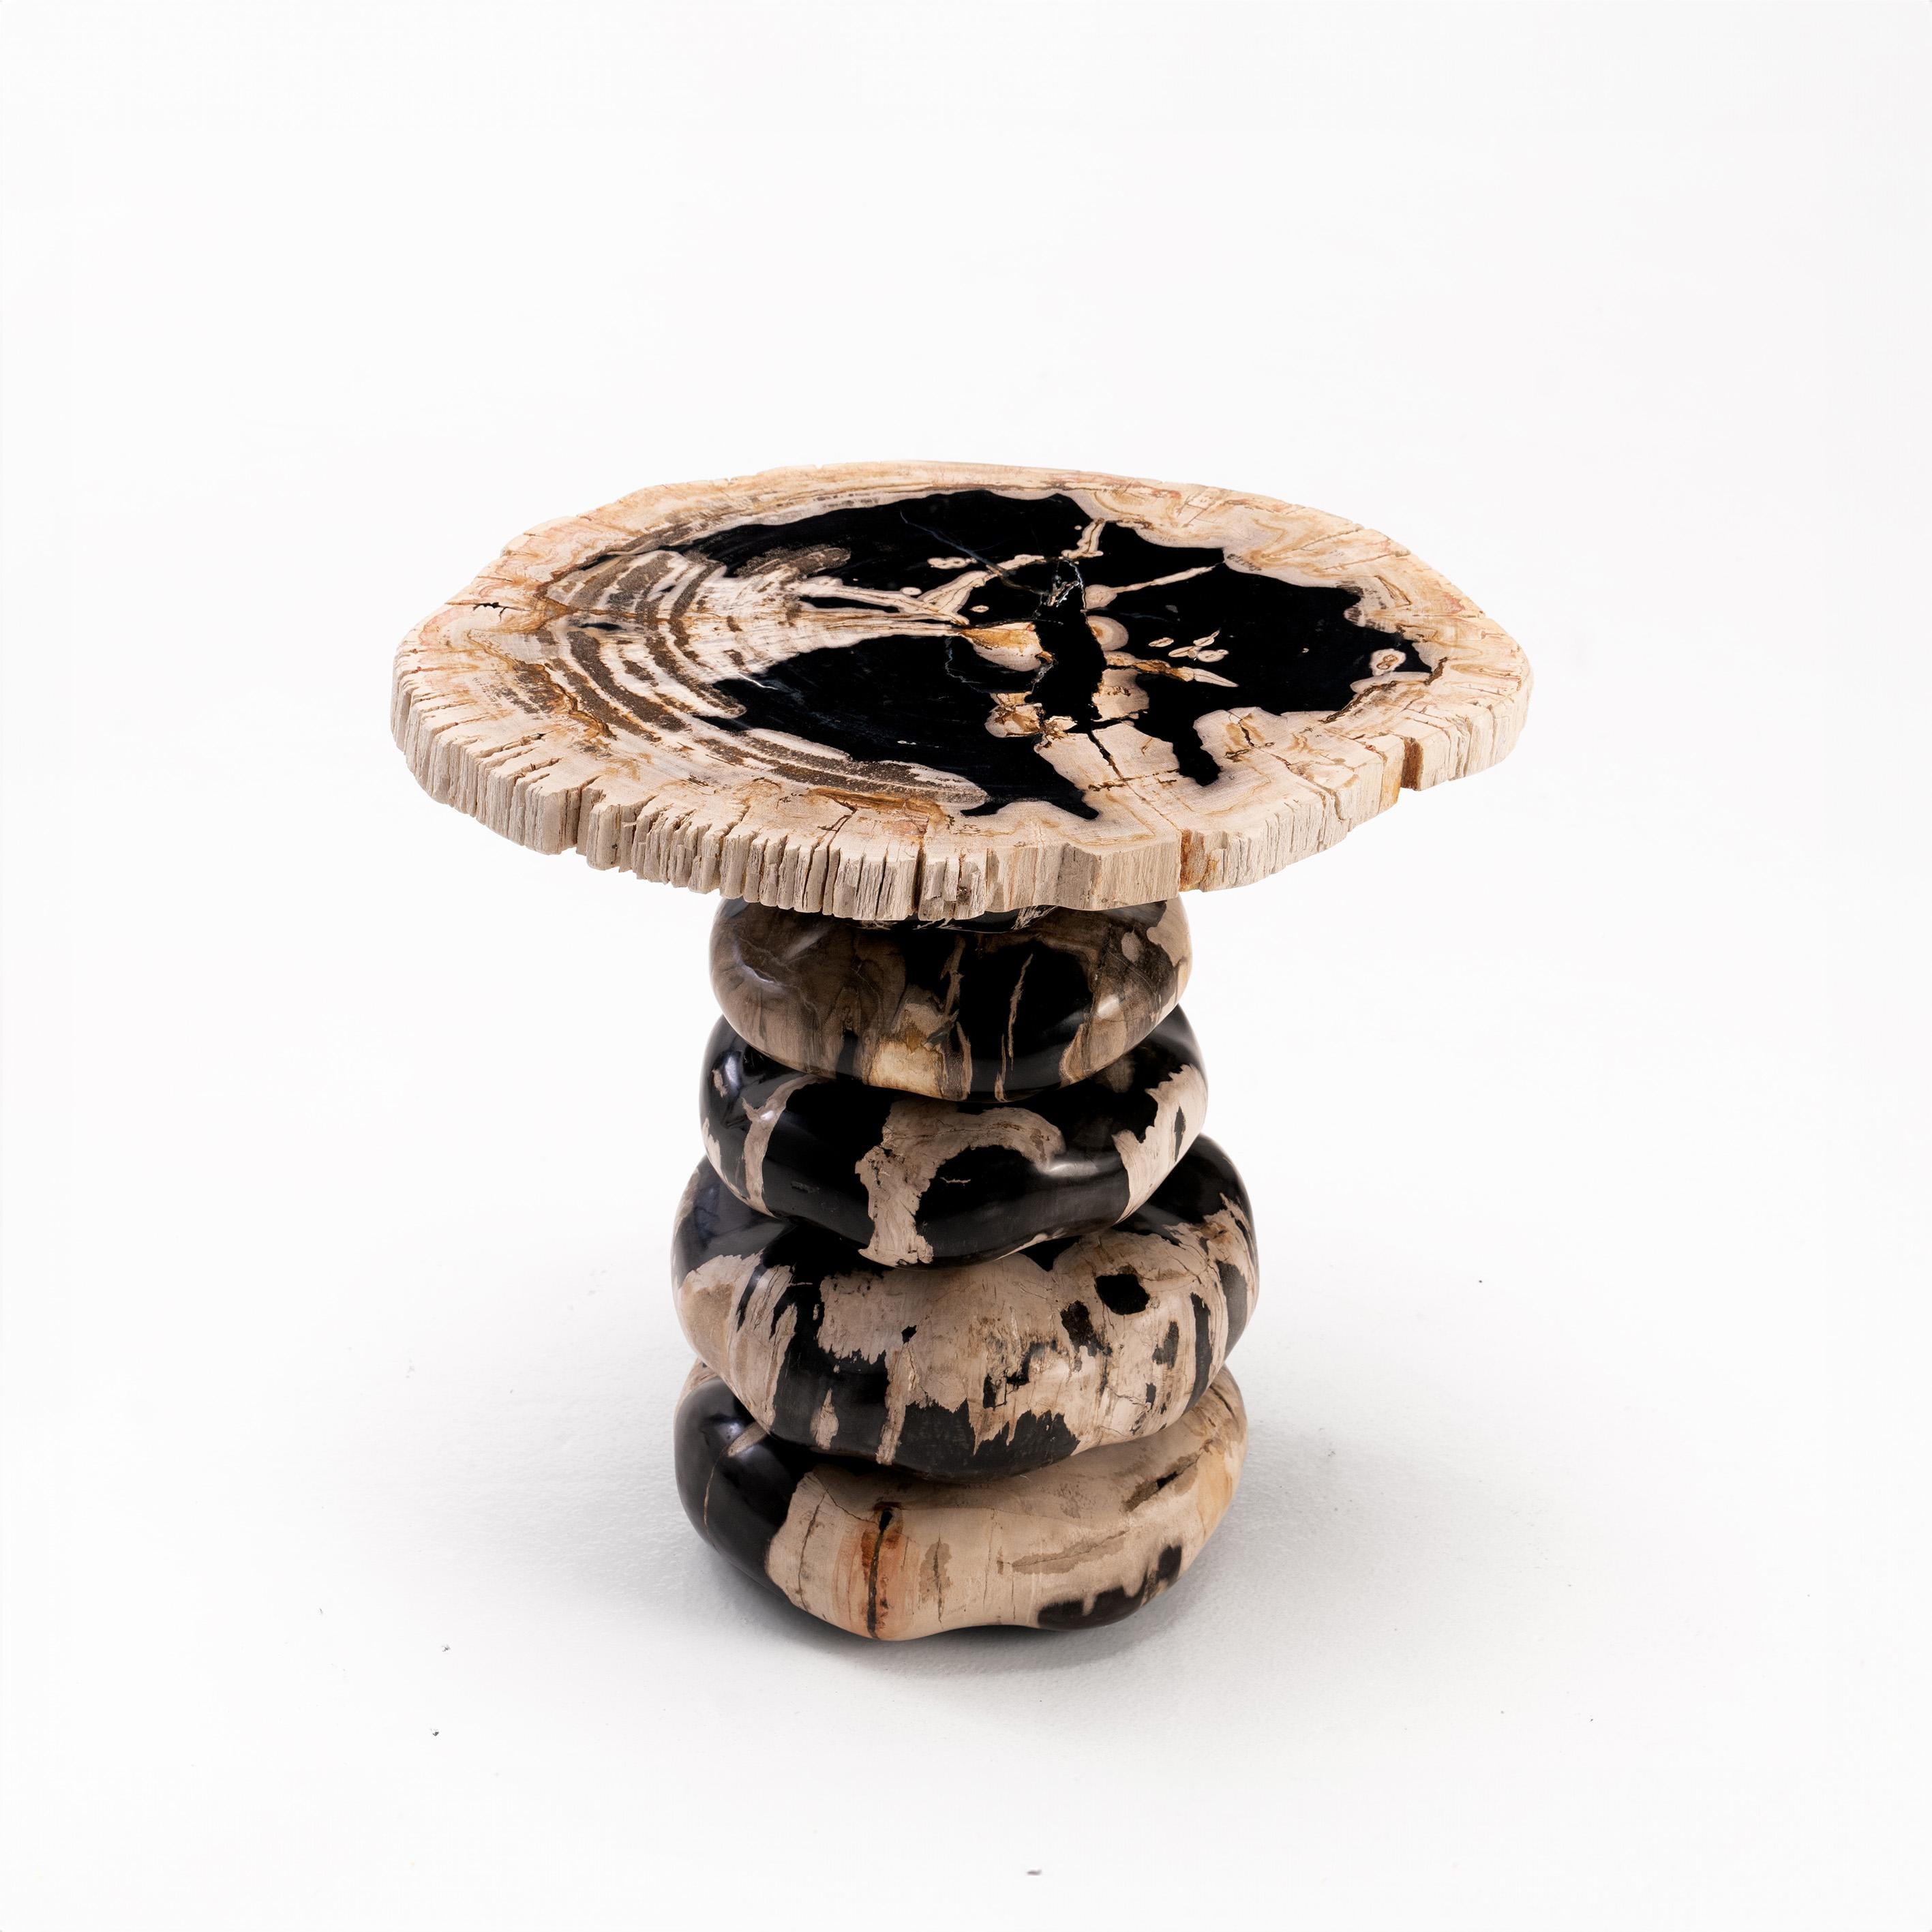 Dwayne Johnson Side Table by Odditi
Dimensions: W 47 x D 40 x H 45 cm
Materials: Petrified Wood, Steel

Born from our lifelong obsession with stacking rocks, this totem-like table features hand-sculpted, organic shaped petrified wood forms, adorned